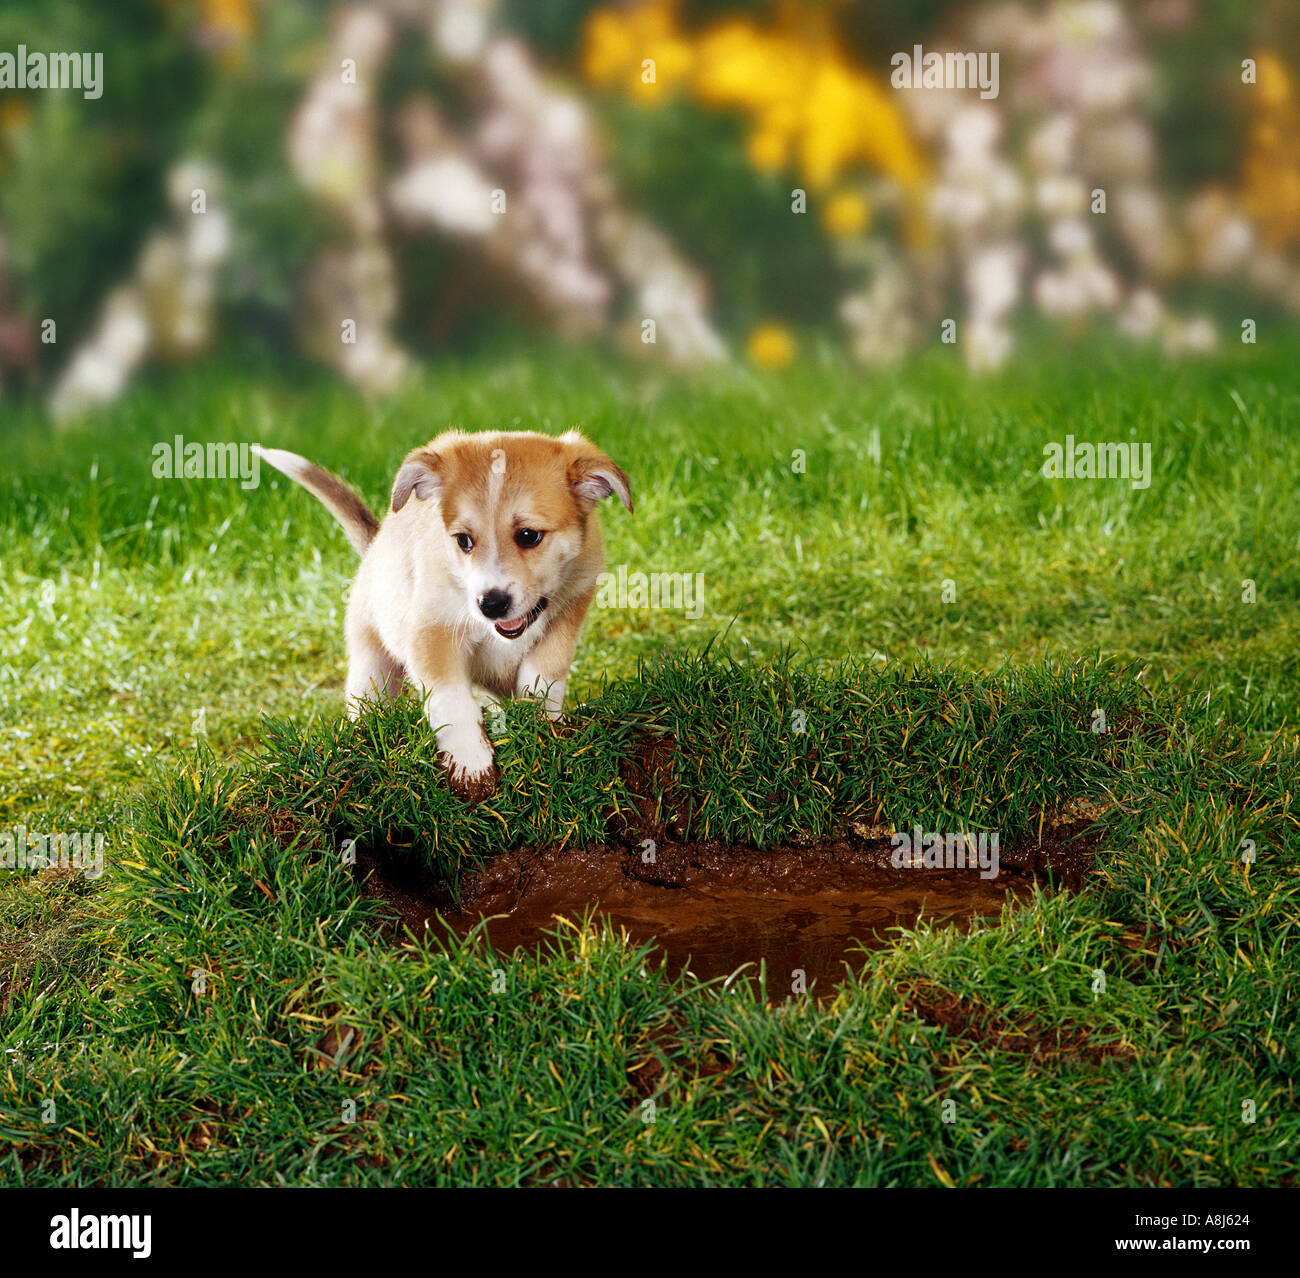 half-breed dog - puppy six weeks standing in front of a mud-hole Stock Photo